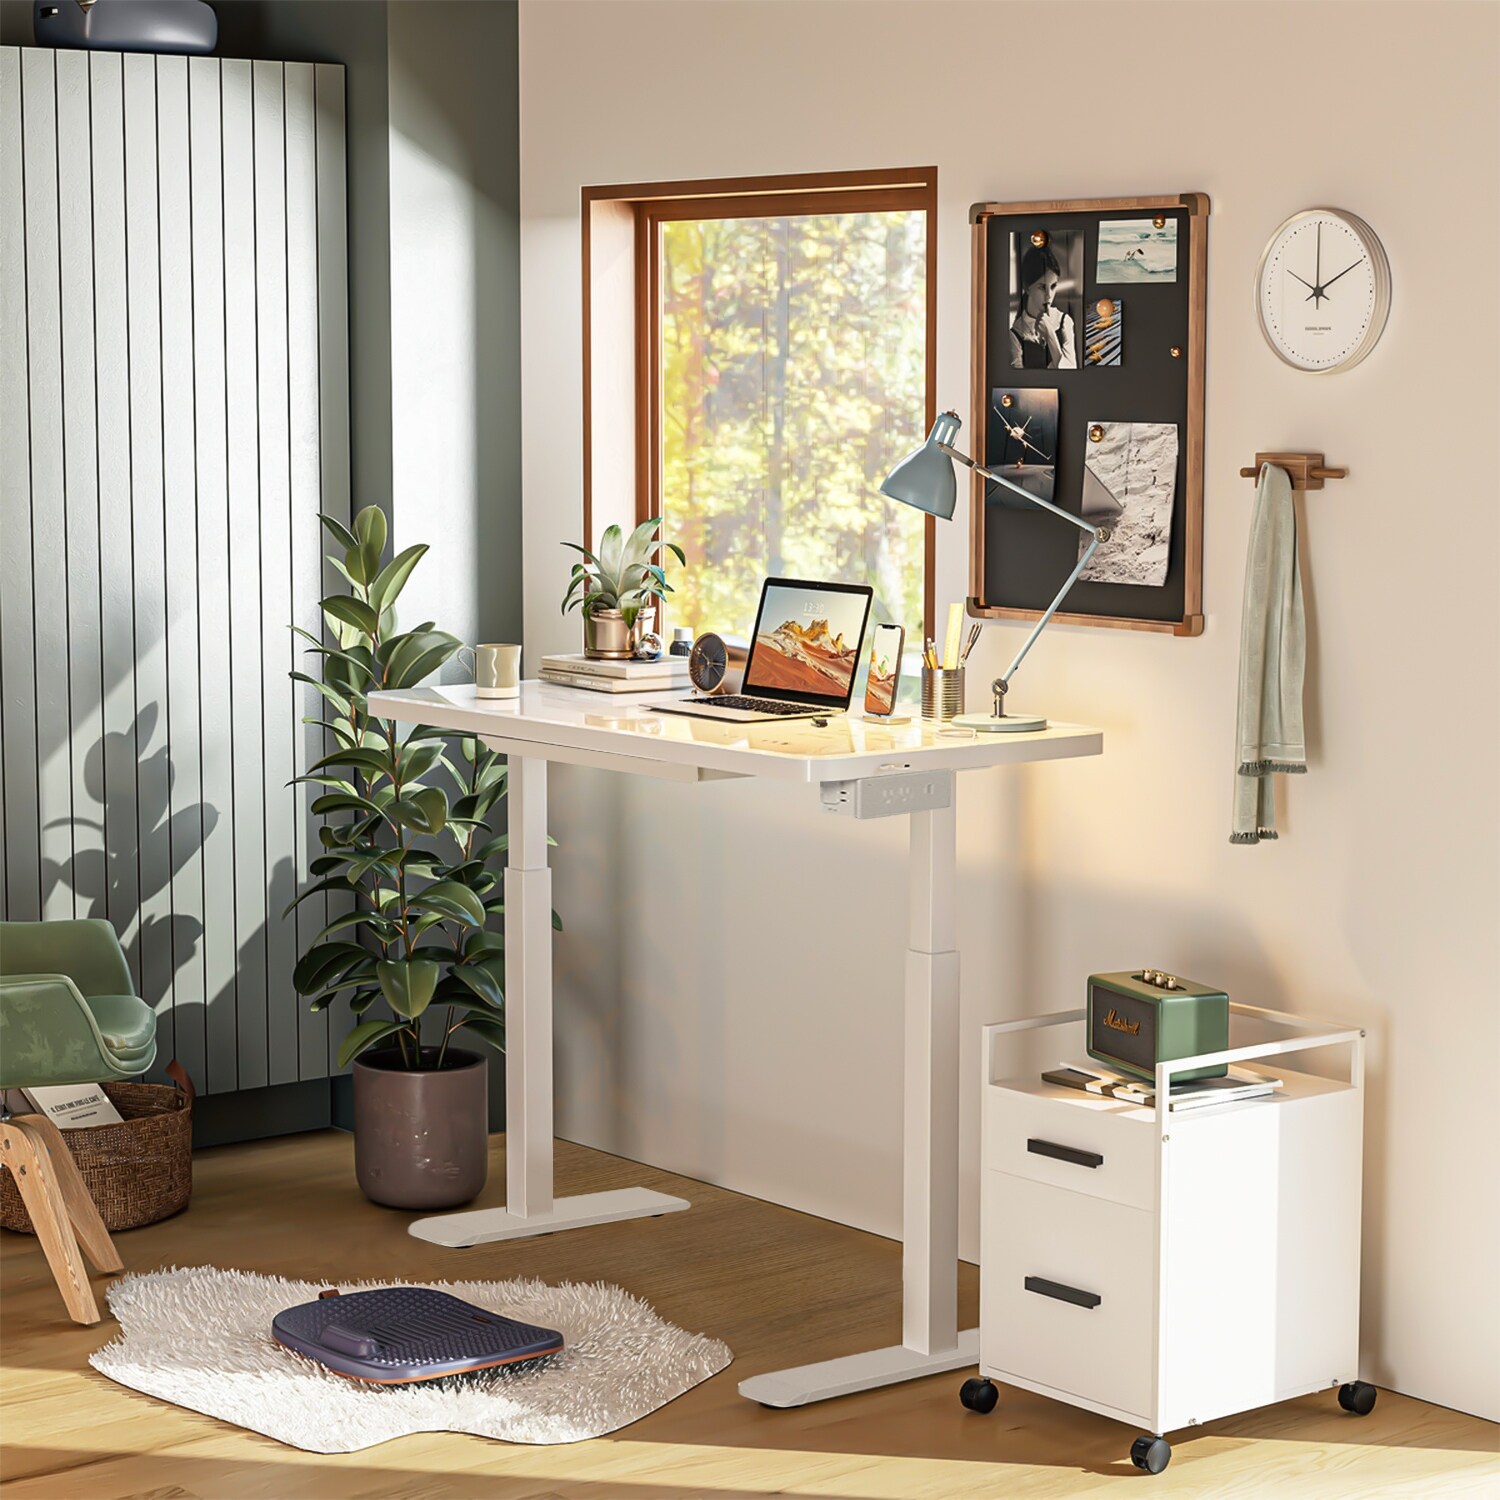 https://ak1.ostkcdn.com/images/products/is/images/direct/08b915750f48e91a40aea7af094c03fff51f6300/Small-Computer-Desk-Study-Table-for-Small-Spaces-Home-Office-Student-Laptop-PC-Writing-Desks-Office-Desk-with-Keyboard-Tray.jpg